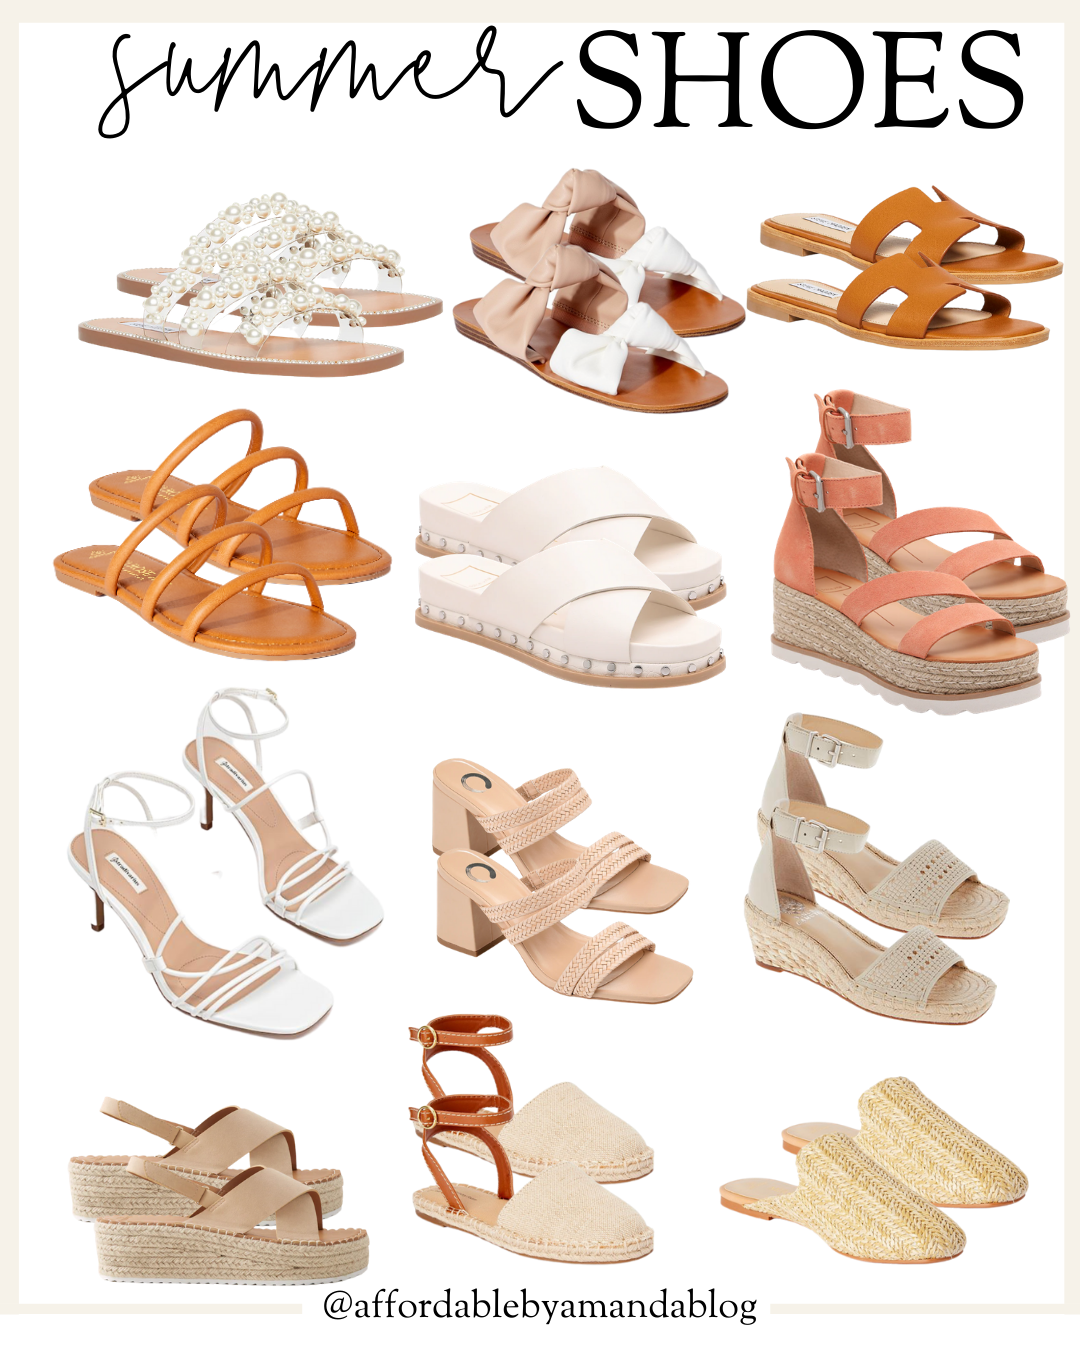 7 Cute Summer 2021 Shoe Trends - Affordable by Amanda